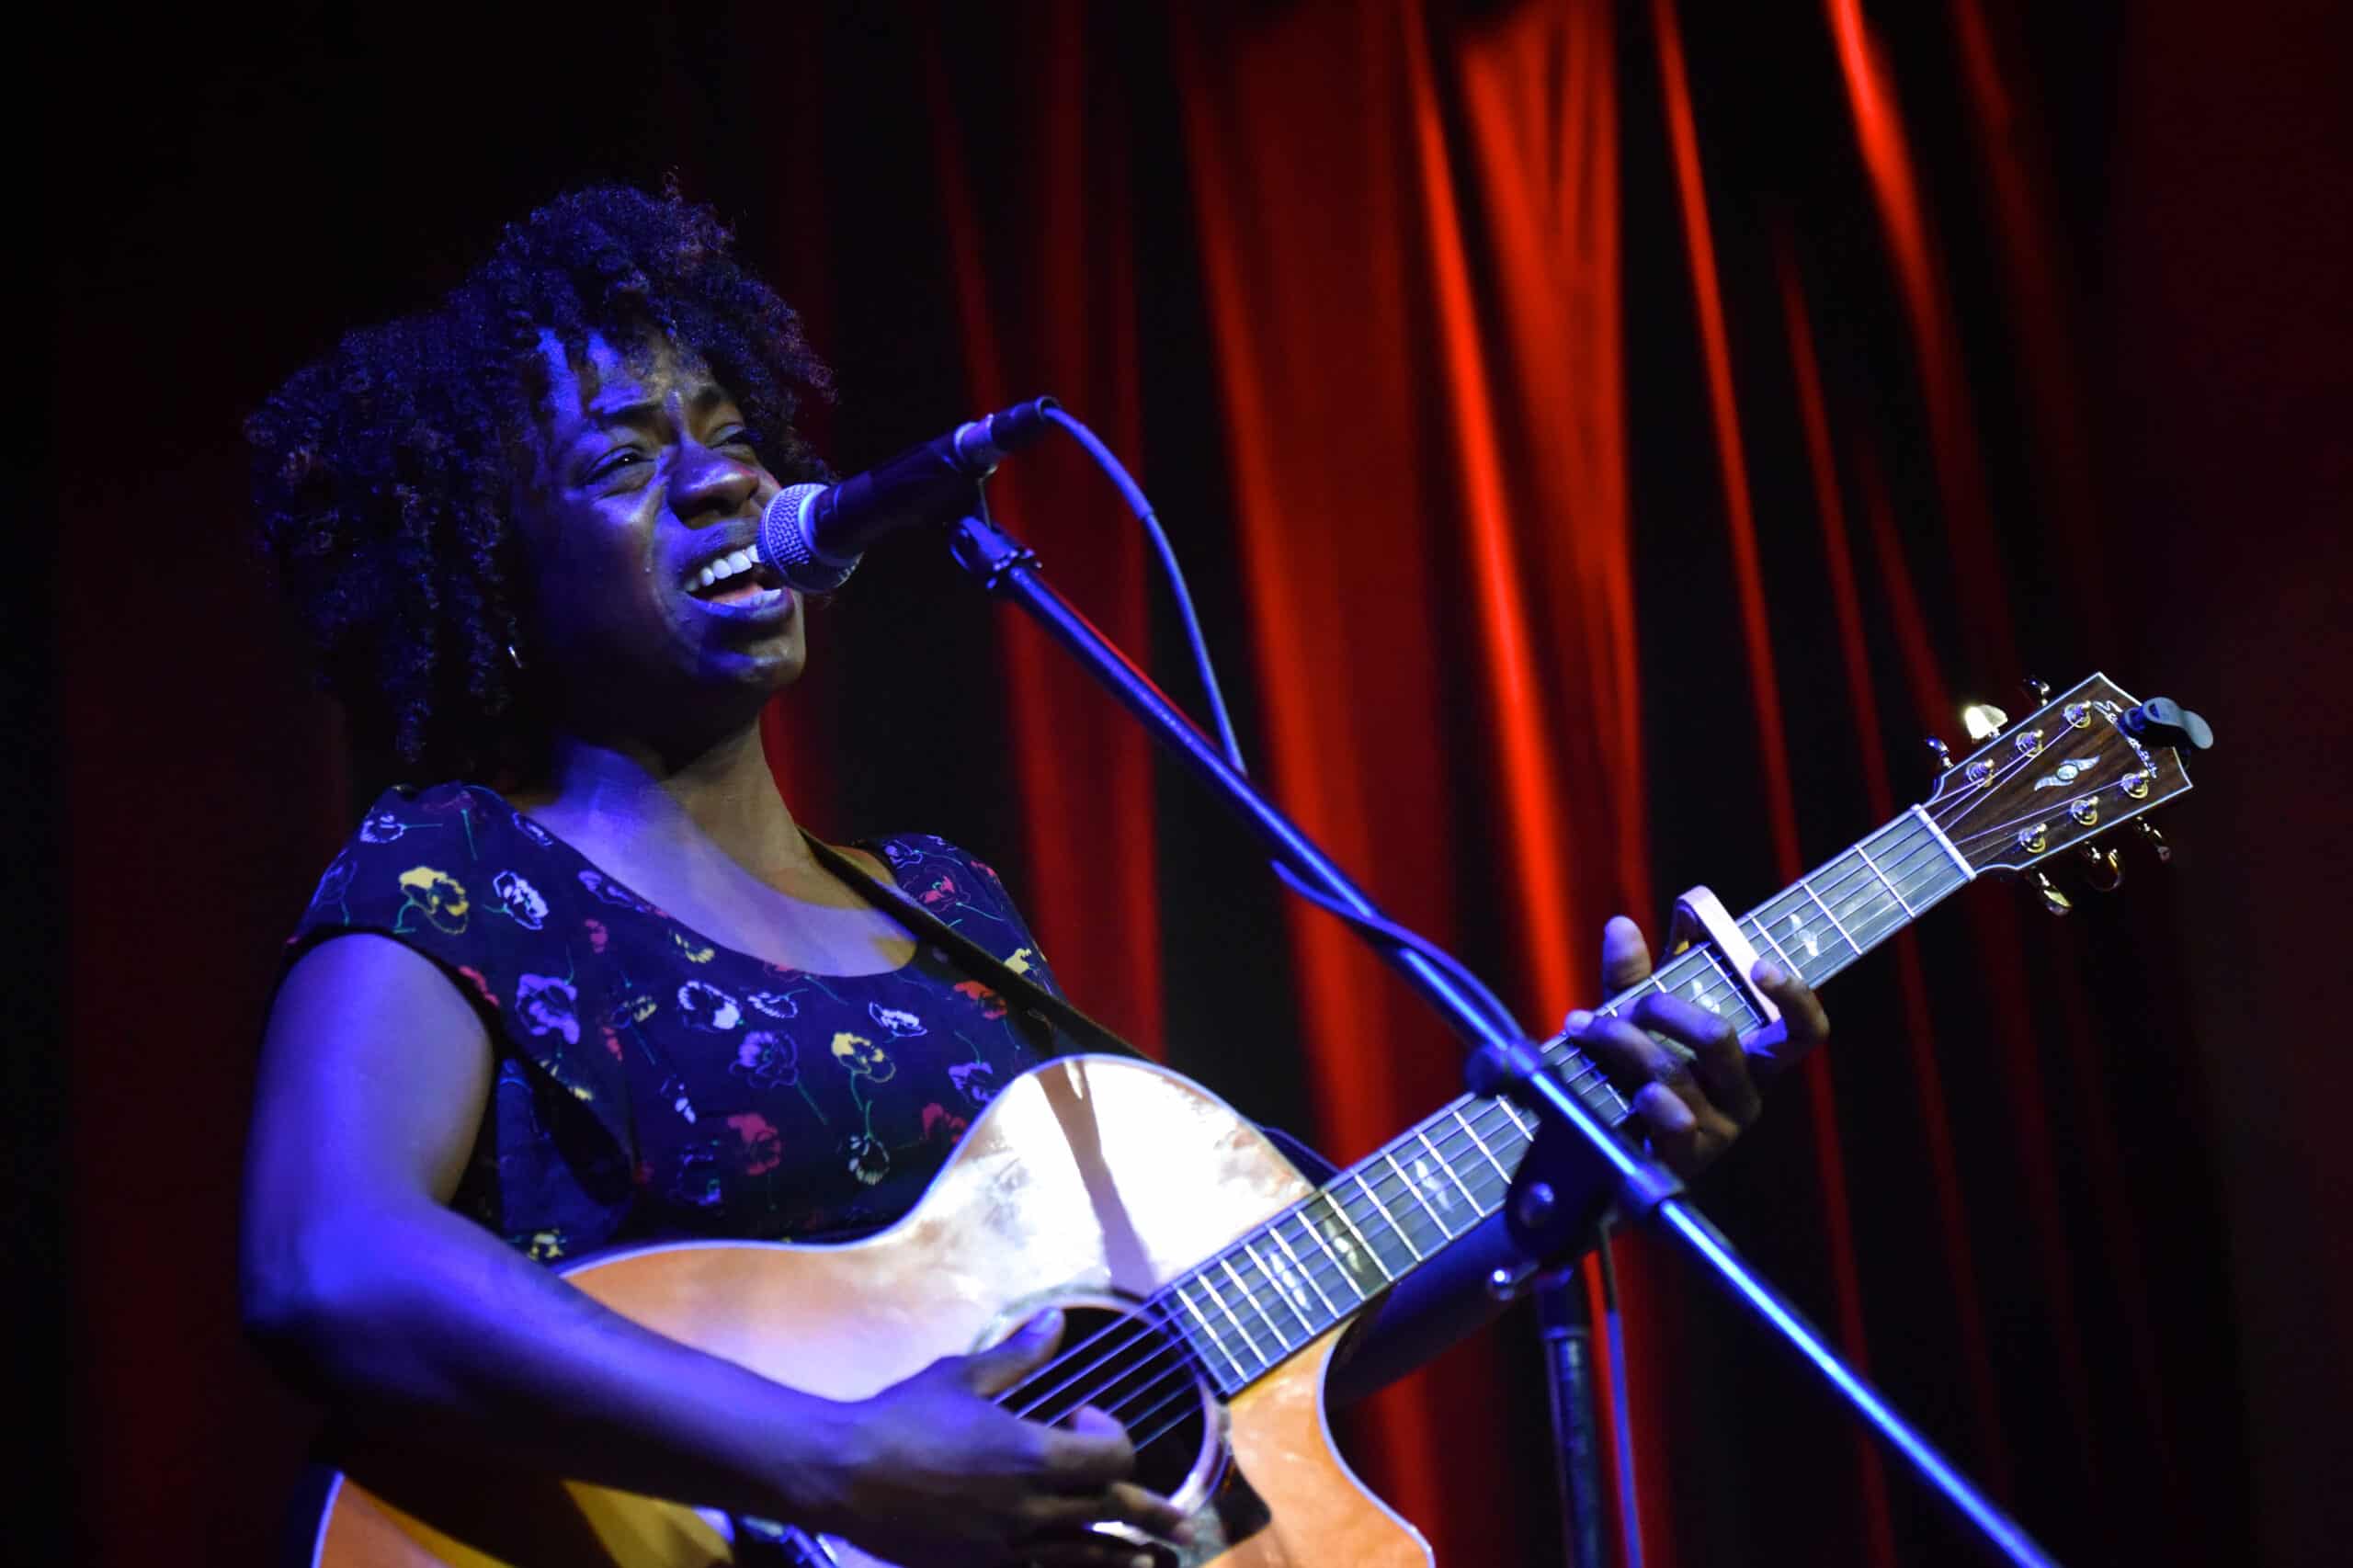 Blues artist Sunny War, a black woman, holds an acoustic guitar and sings into a microphone during a concert at Swallow Hill Music, a nonprofit music venue in Denver.